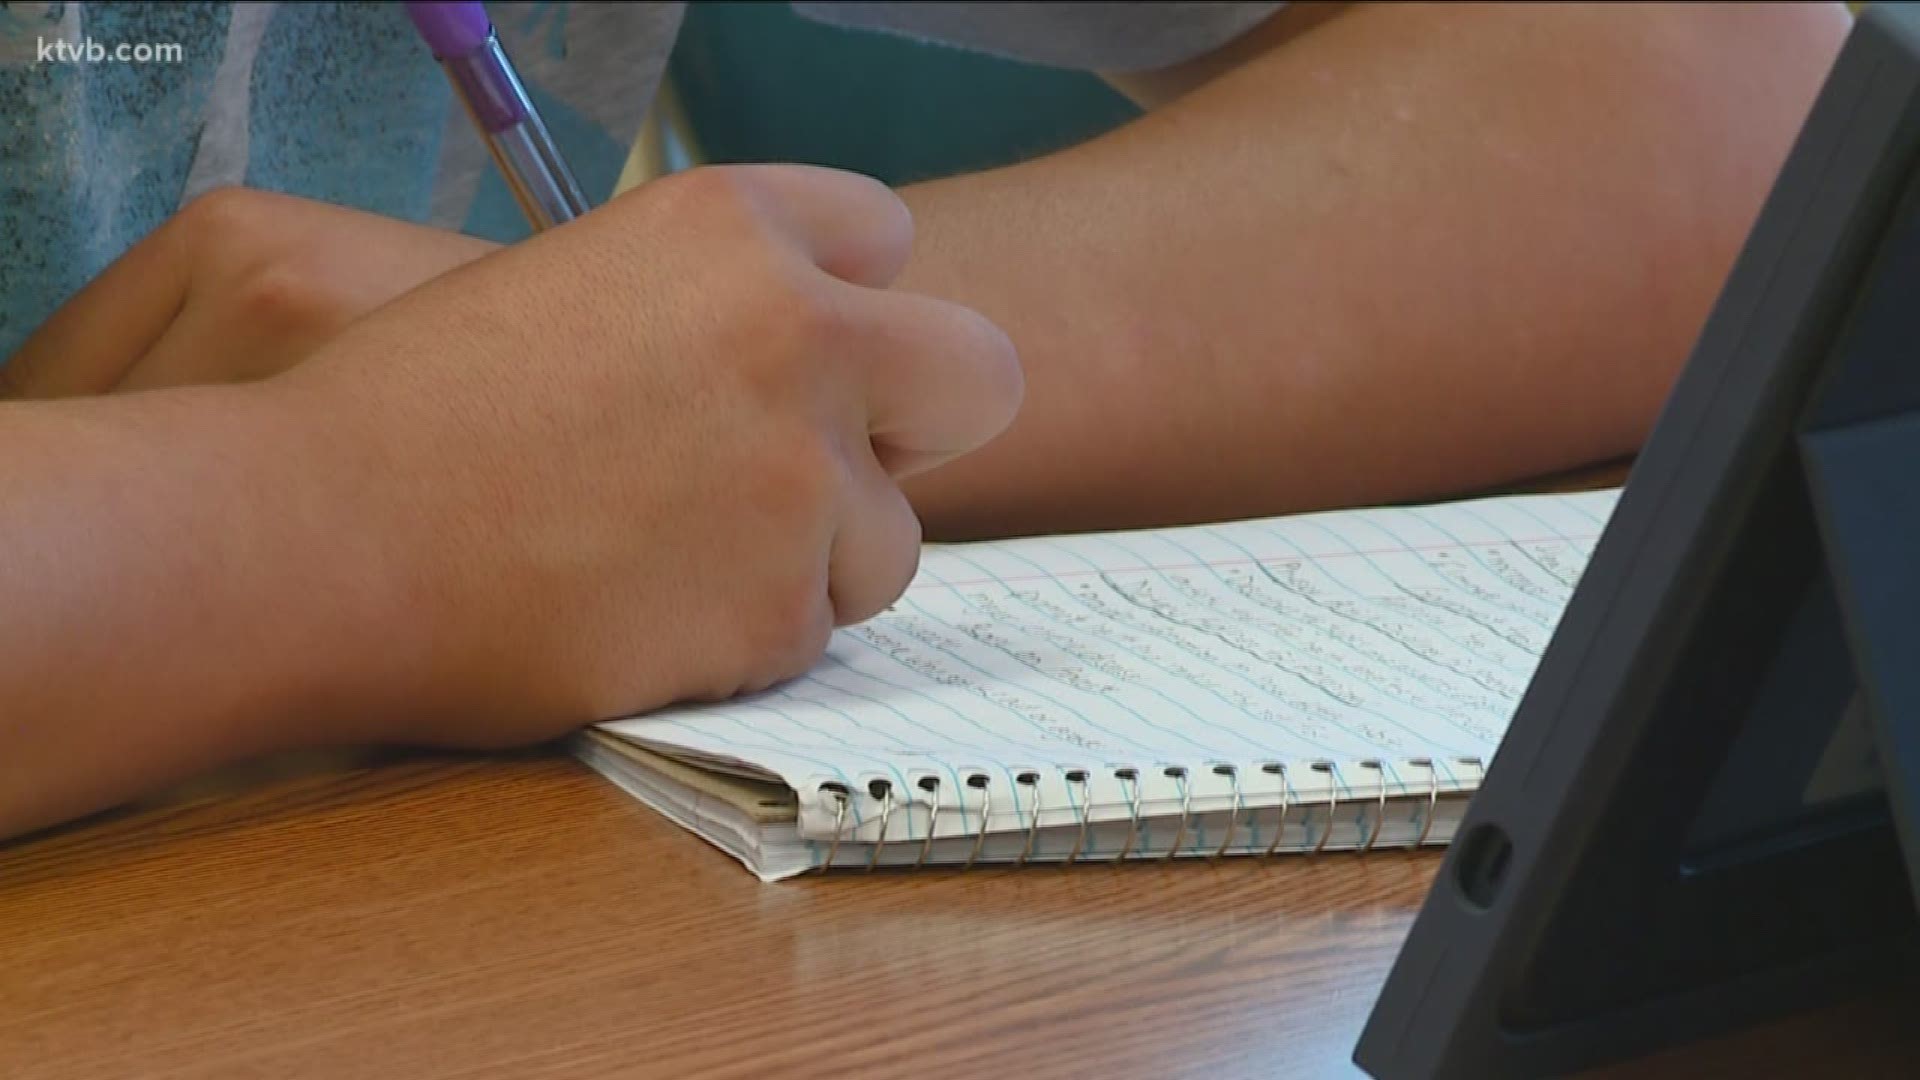 The legislation proposes that all Idaho public schools start after Labor Day weekend.